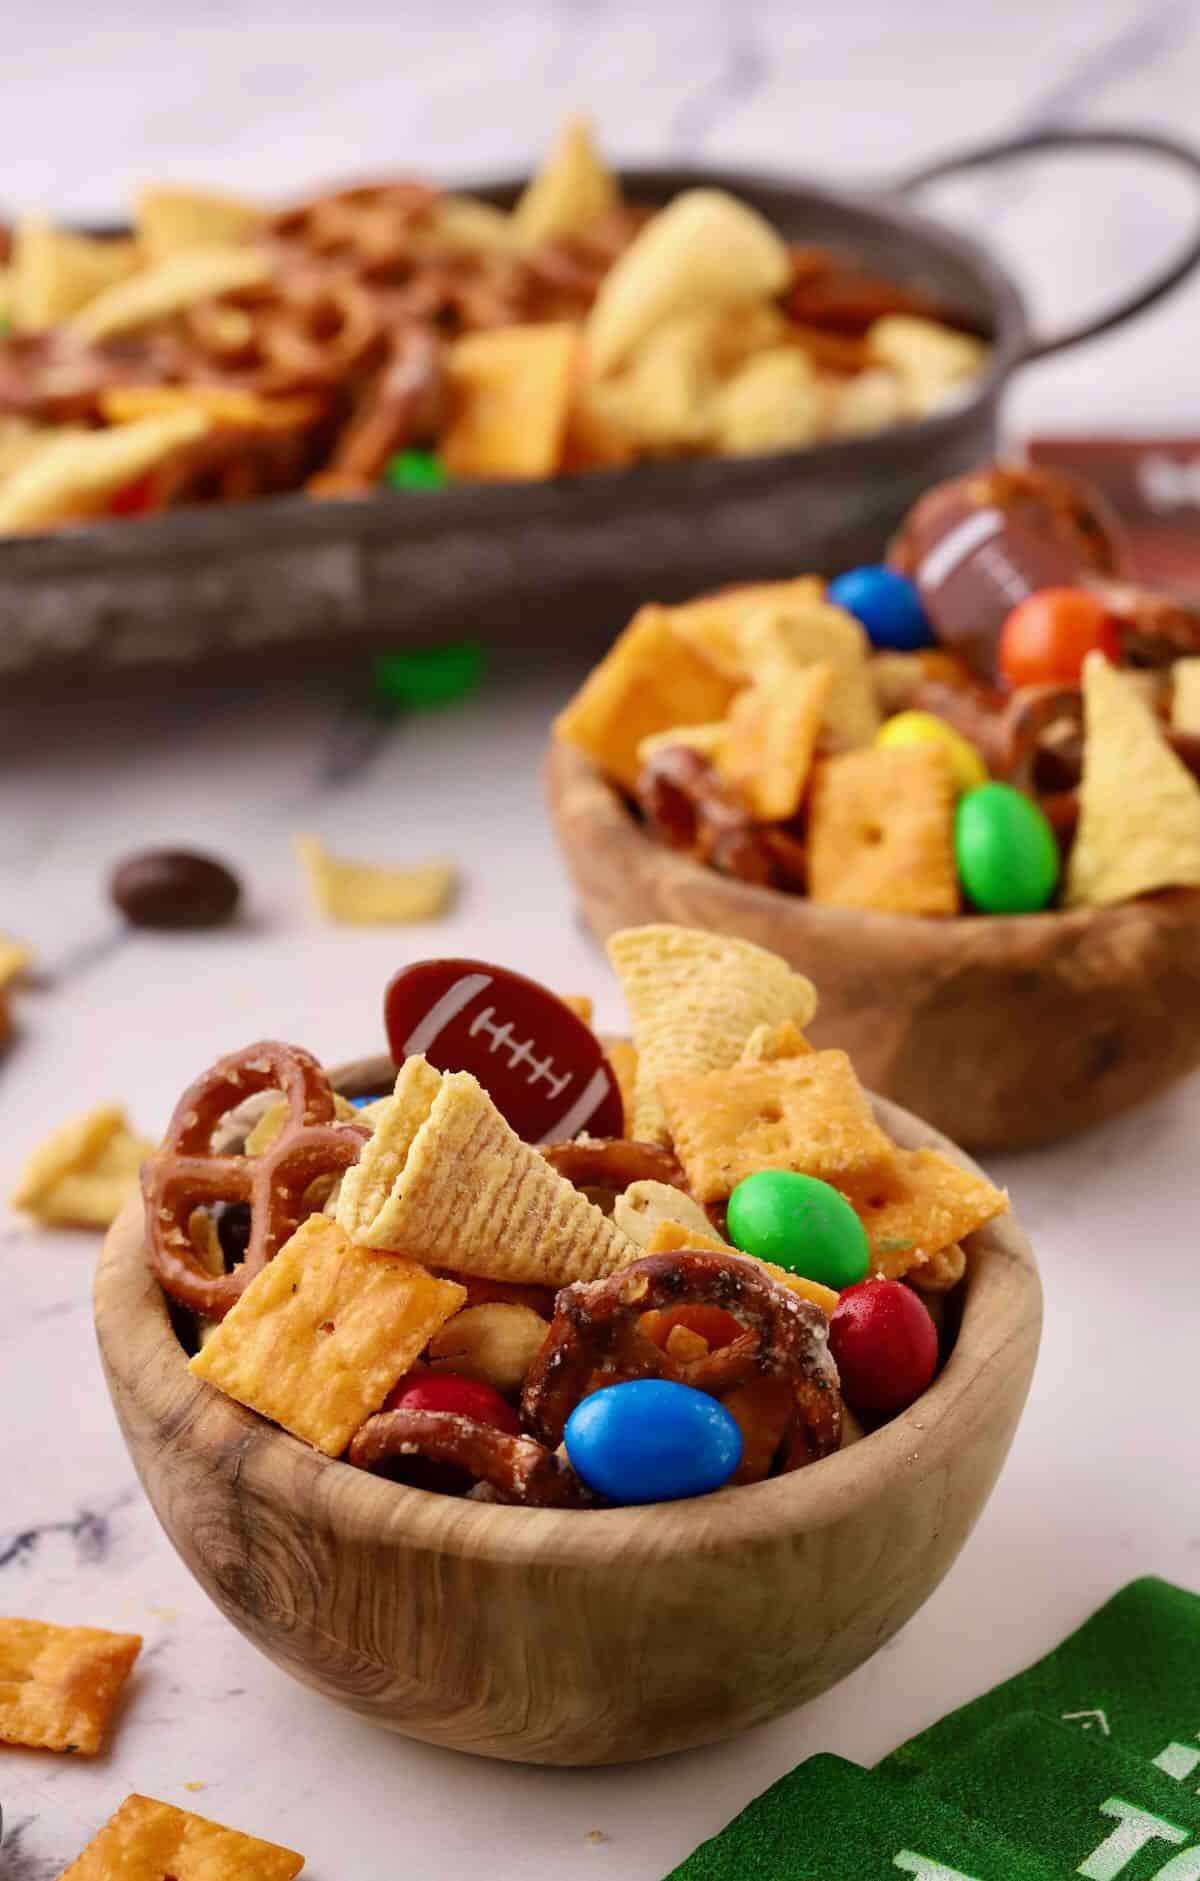 Two bowls of snack mix with Cheez-its, Bugles, and Pretzels.